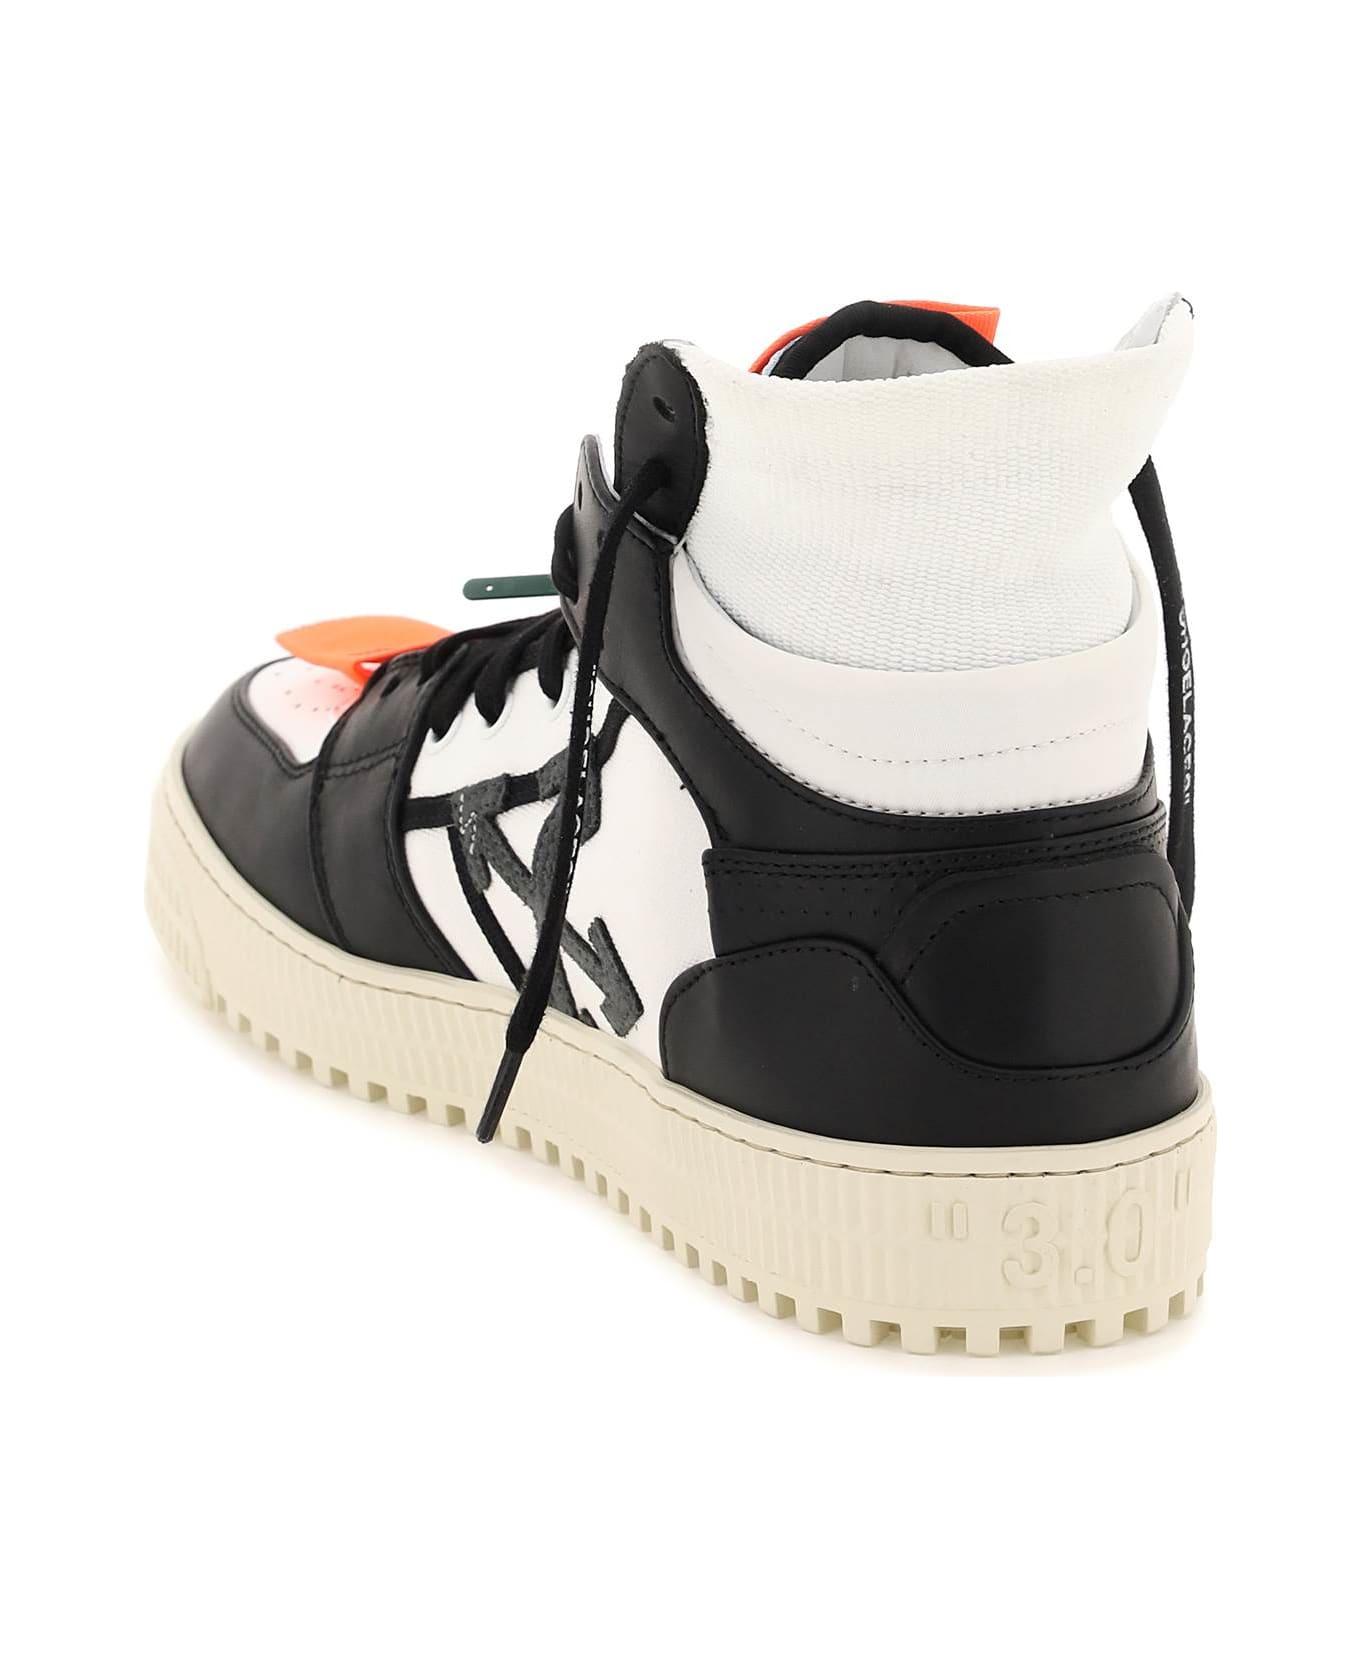 Off-White 'off-court 3.0' High-top Sneakers - Black スニーカー